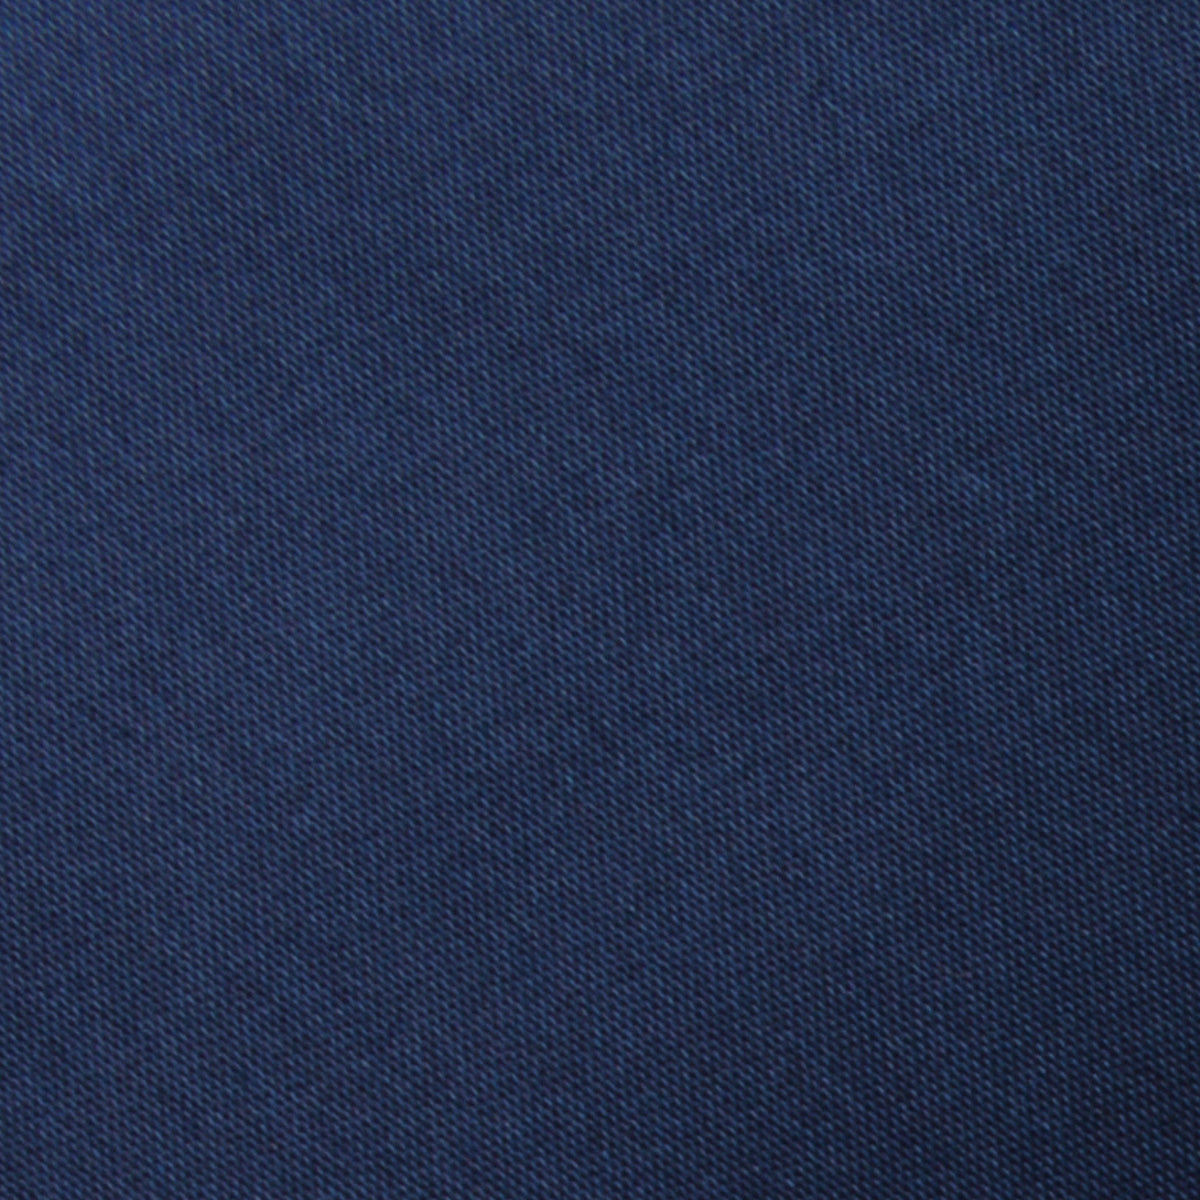 Admiral Navy Blue Satin Bow Tie Fabric